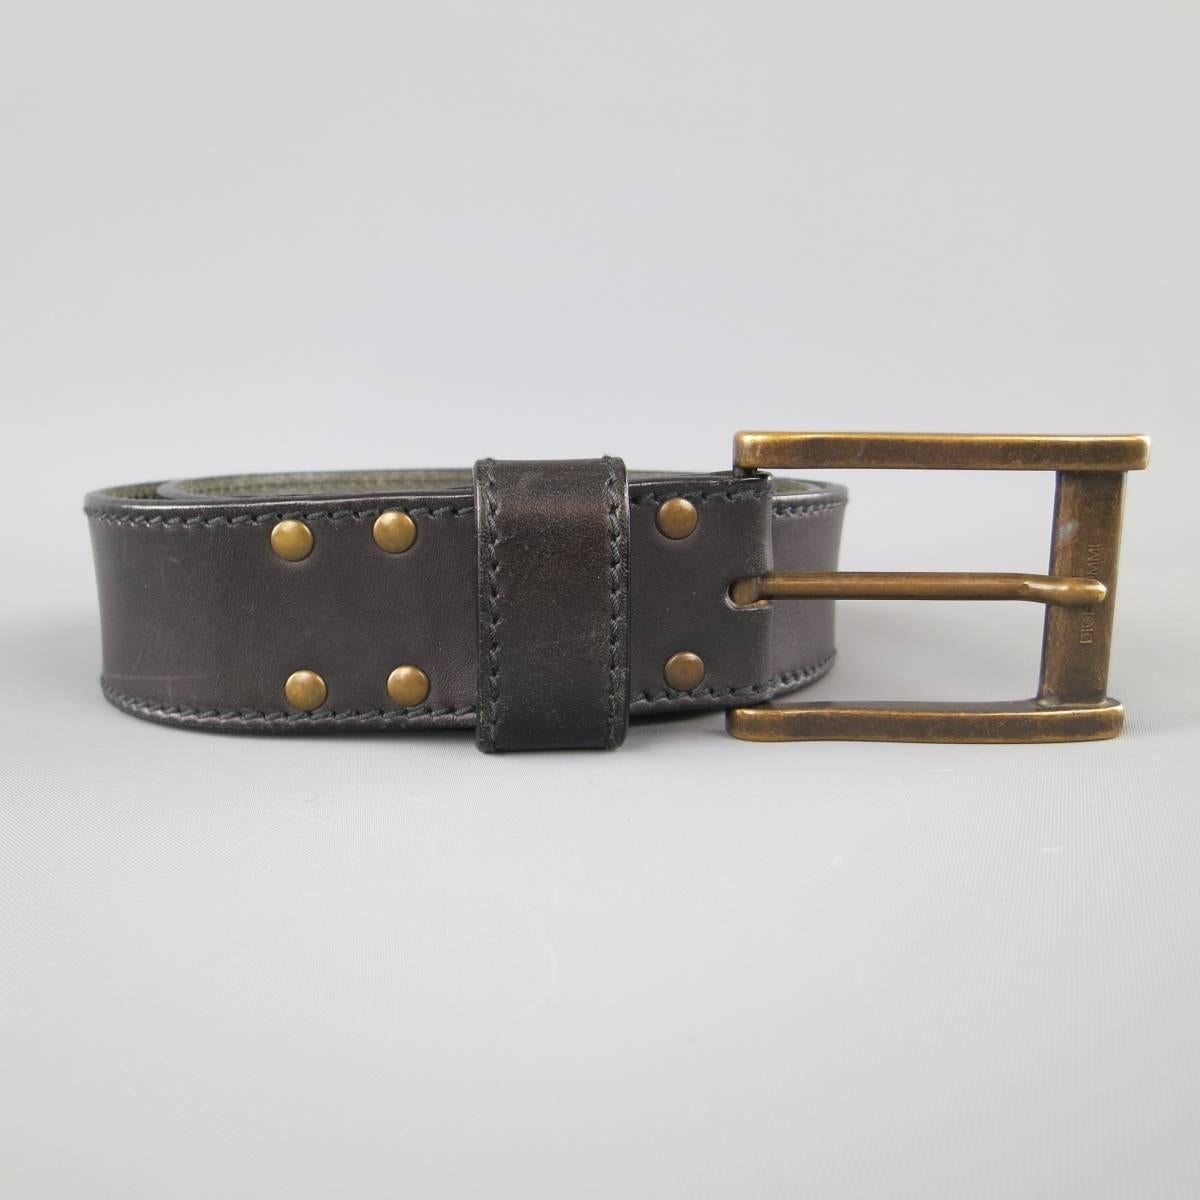 DIOR HOMME belt features a thick black leather strap with stitching and a large, dark gold tone brass buckle. Wear throughout. Made in Italy.
 
Good Pre-Owned Condition.
Marked: 85
 
Length: 36 in.
Width: 1.5 in.
Fits: 32-36 in.
Buckle: 2.75 x 2